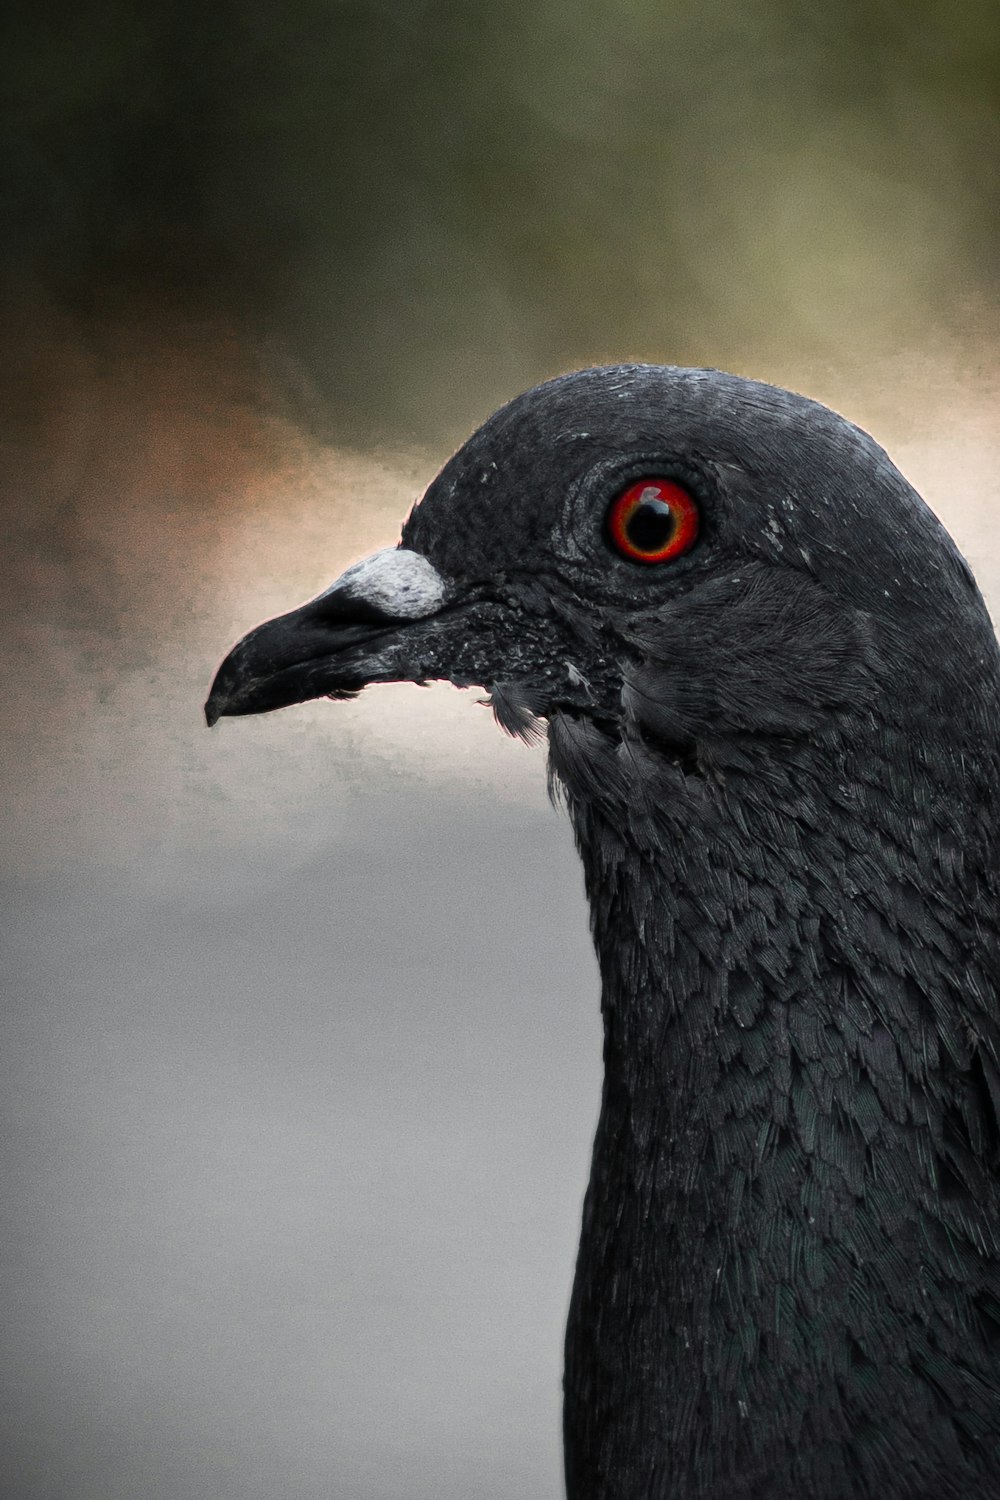 a close up of a black bird with red eyes